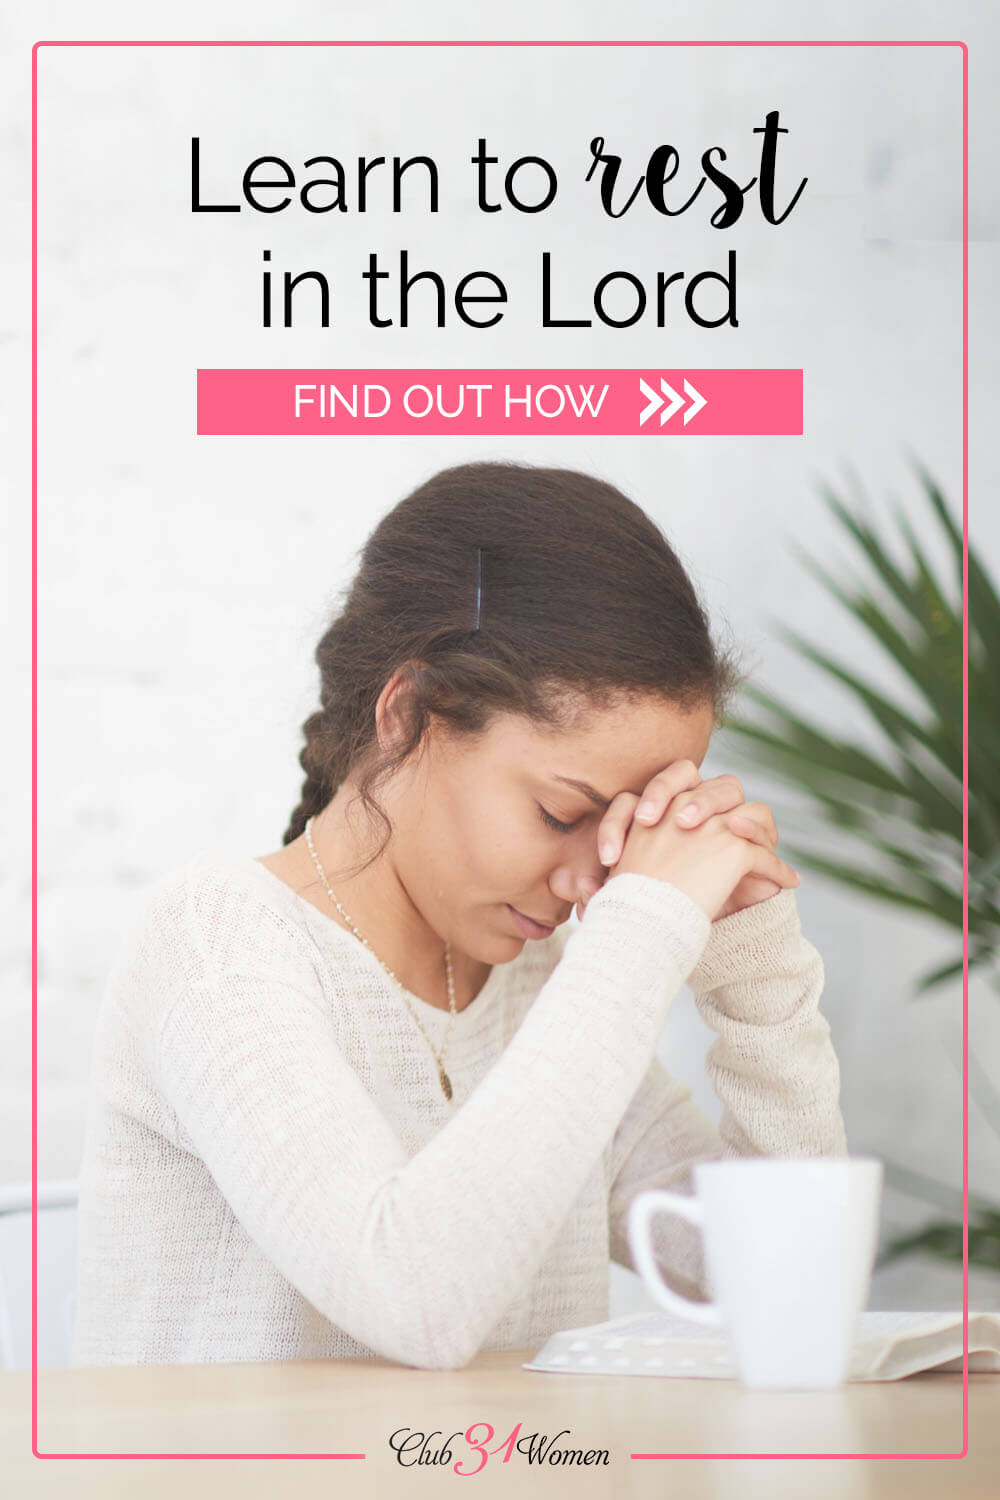 When you rest in the Lord, you let go of pride and perfectionism. It shows trust and brings joy and gives you confidence in Him. via @Club31Women